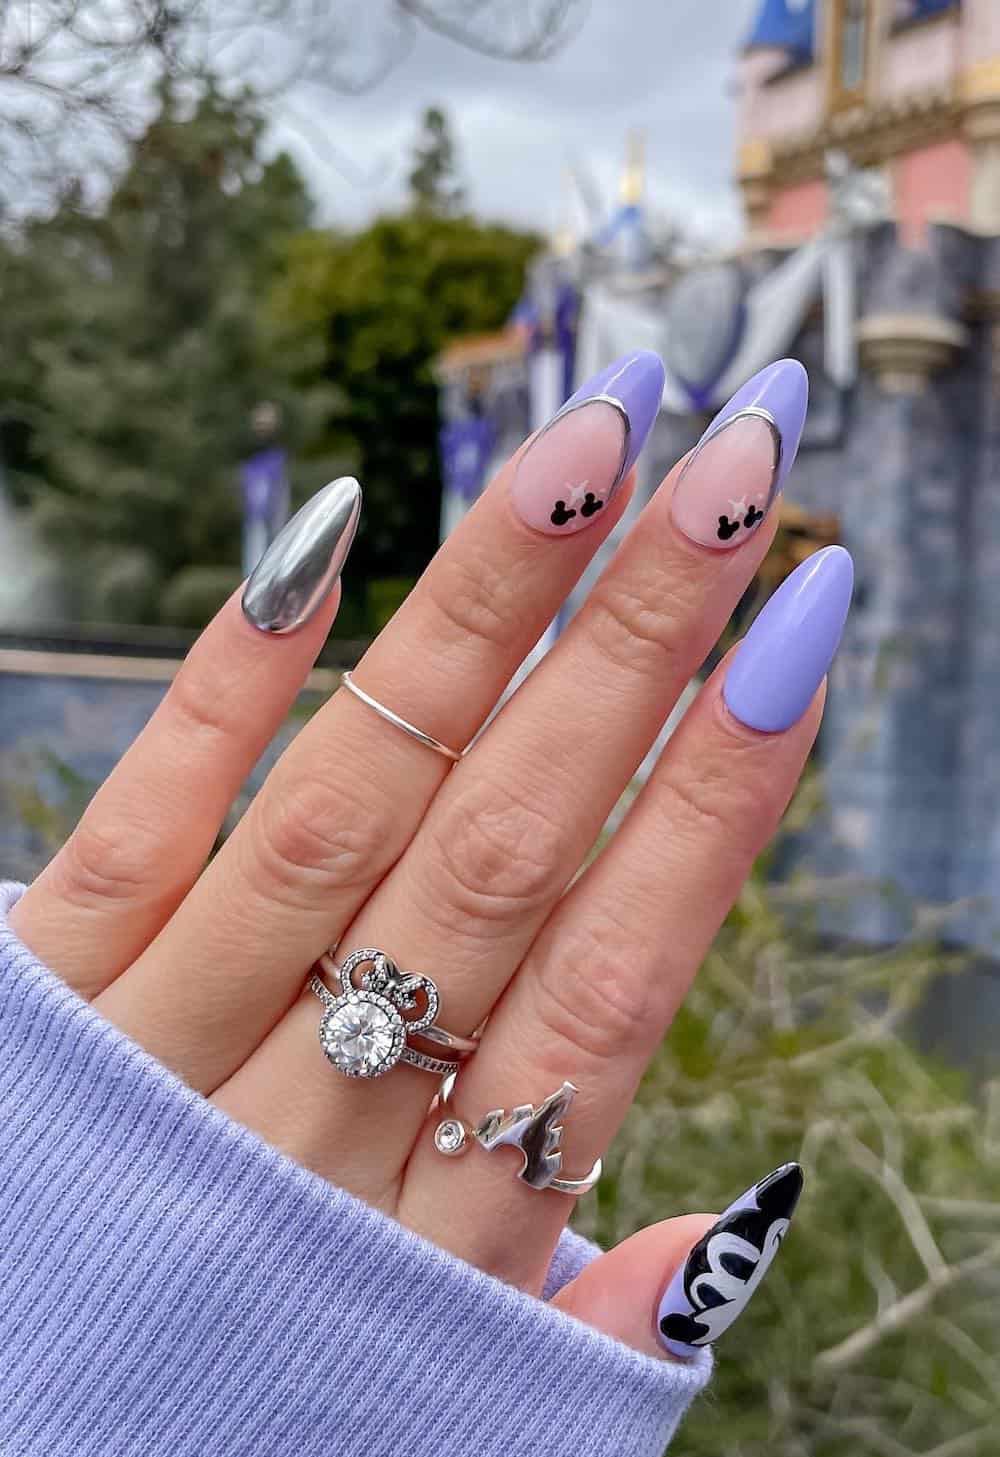 Medium almond nails with a Mickey Mouse design featuring soft purple and metallic silver polish and black and white nail art